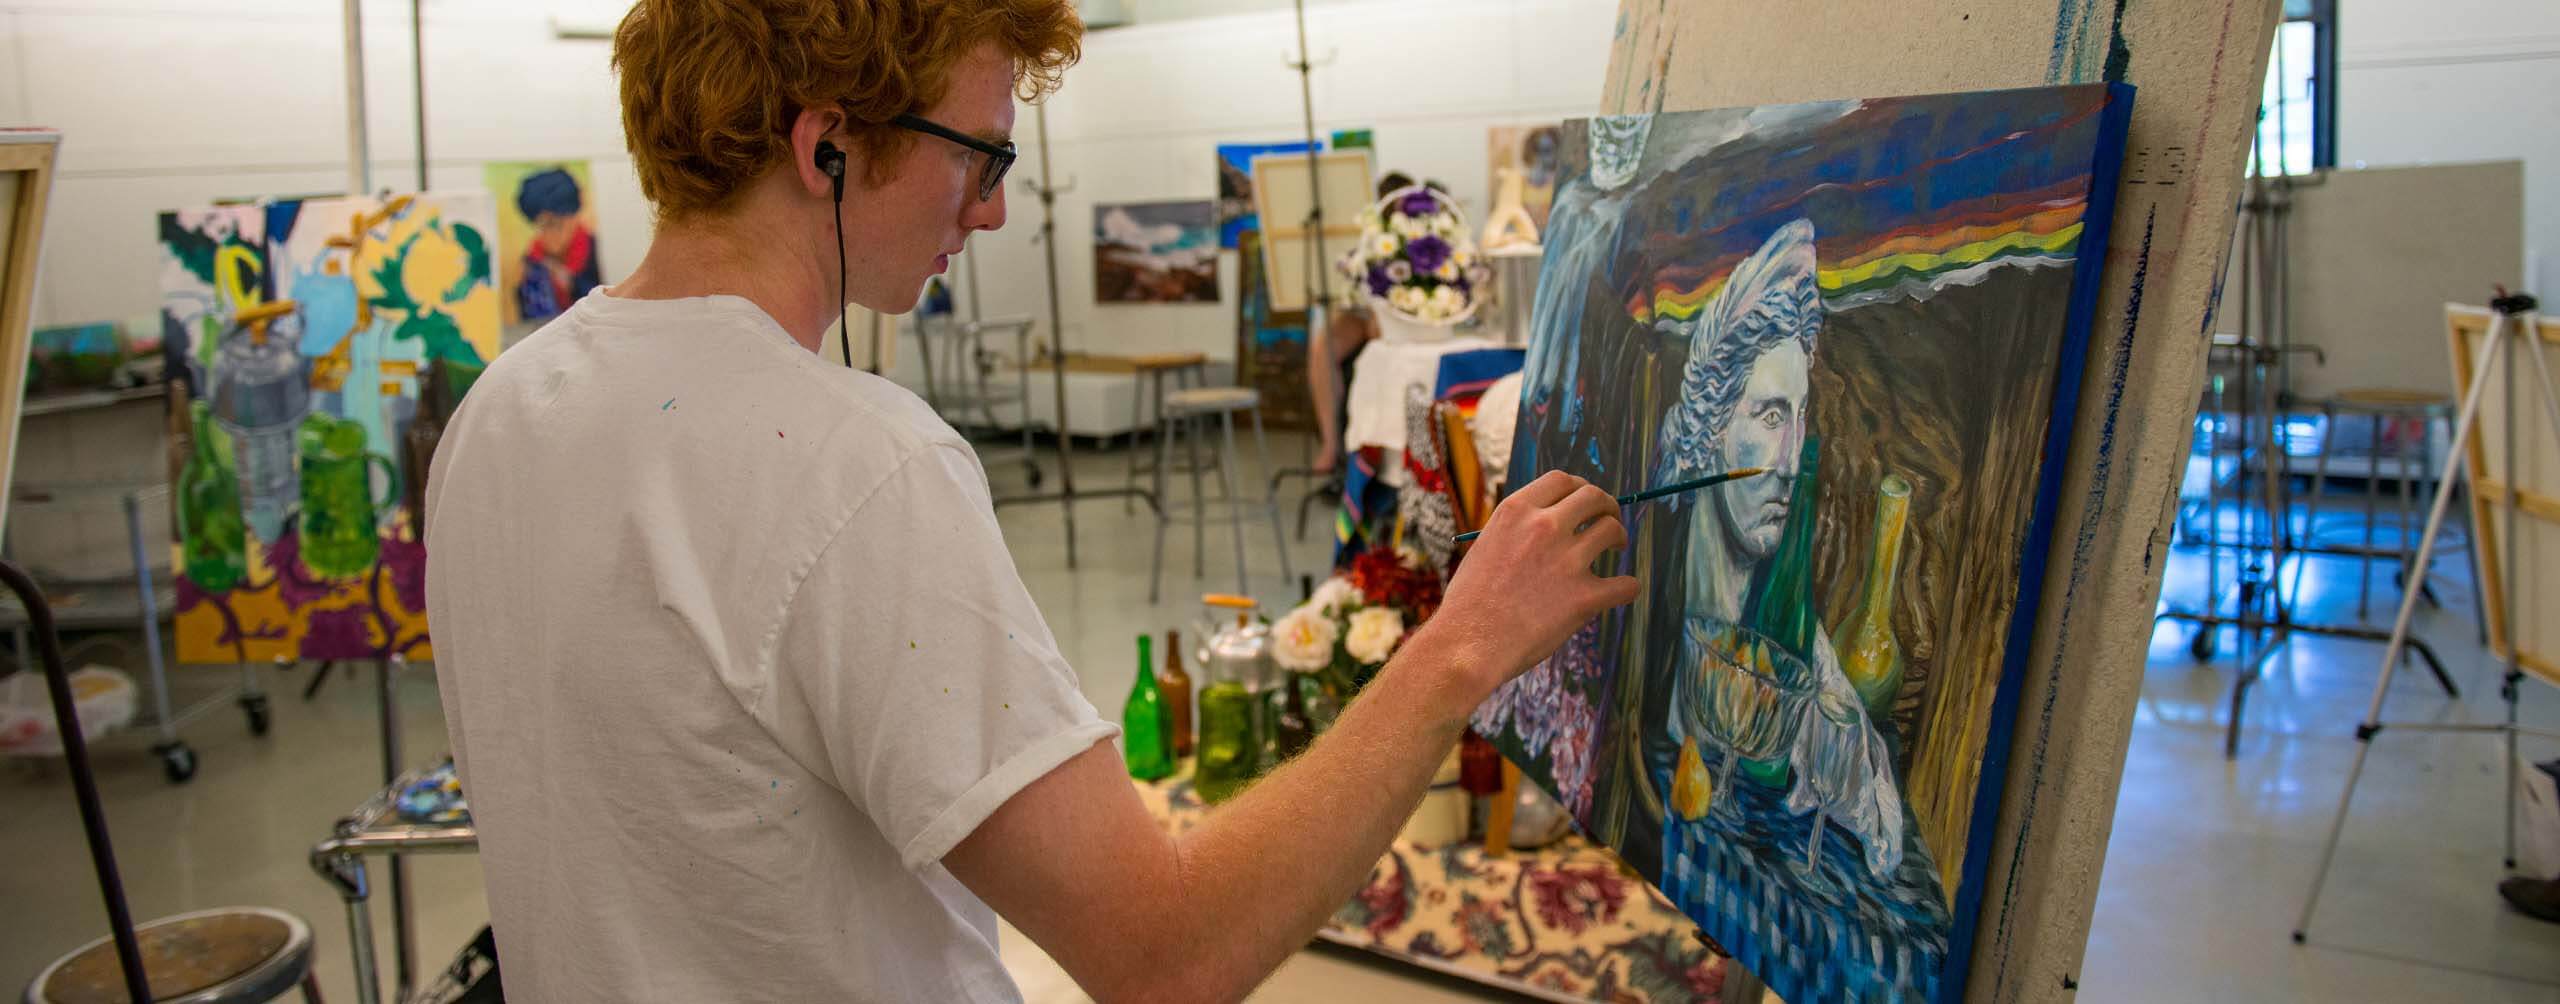 A photo of a student artist painting on a canvas